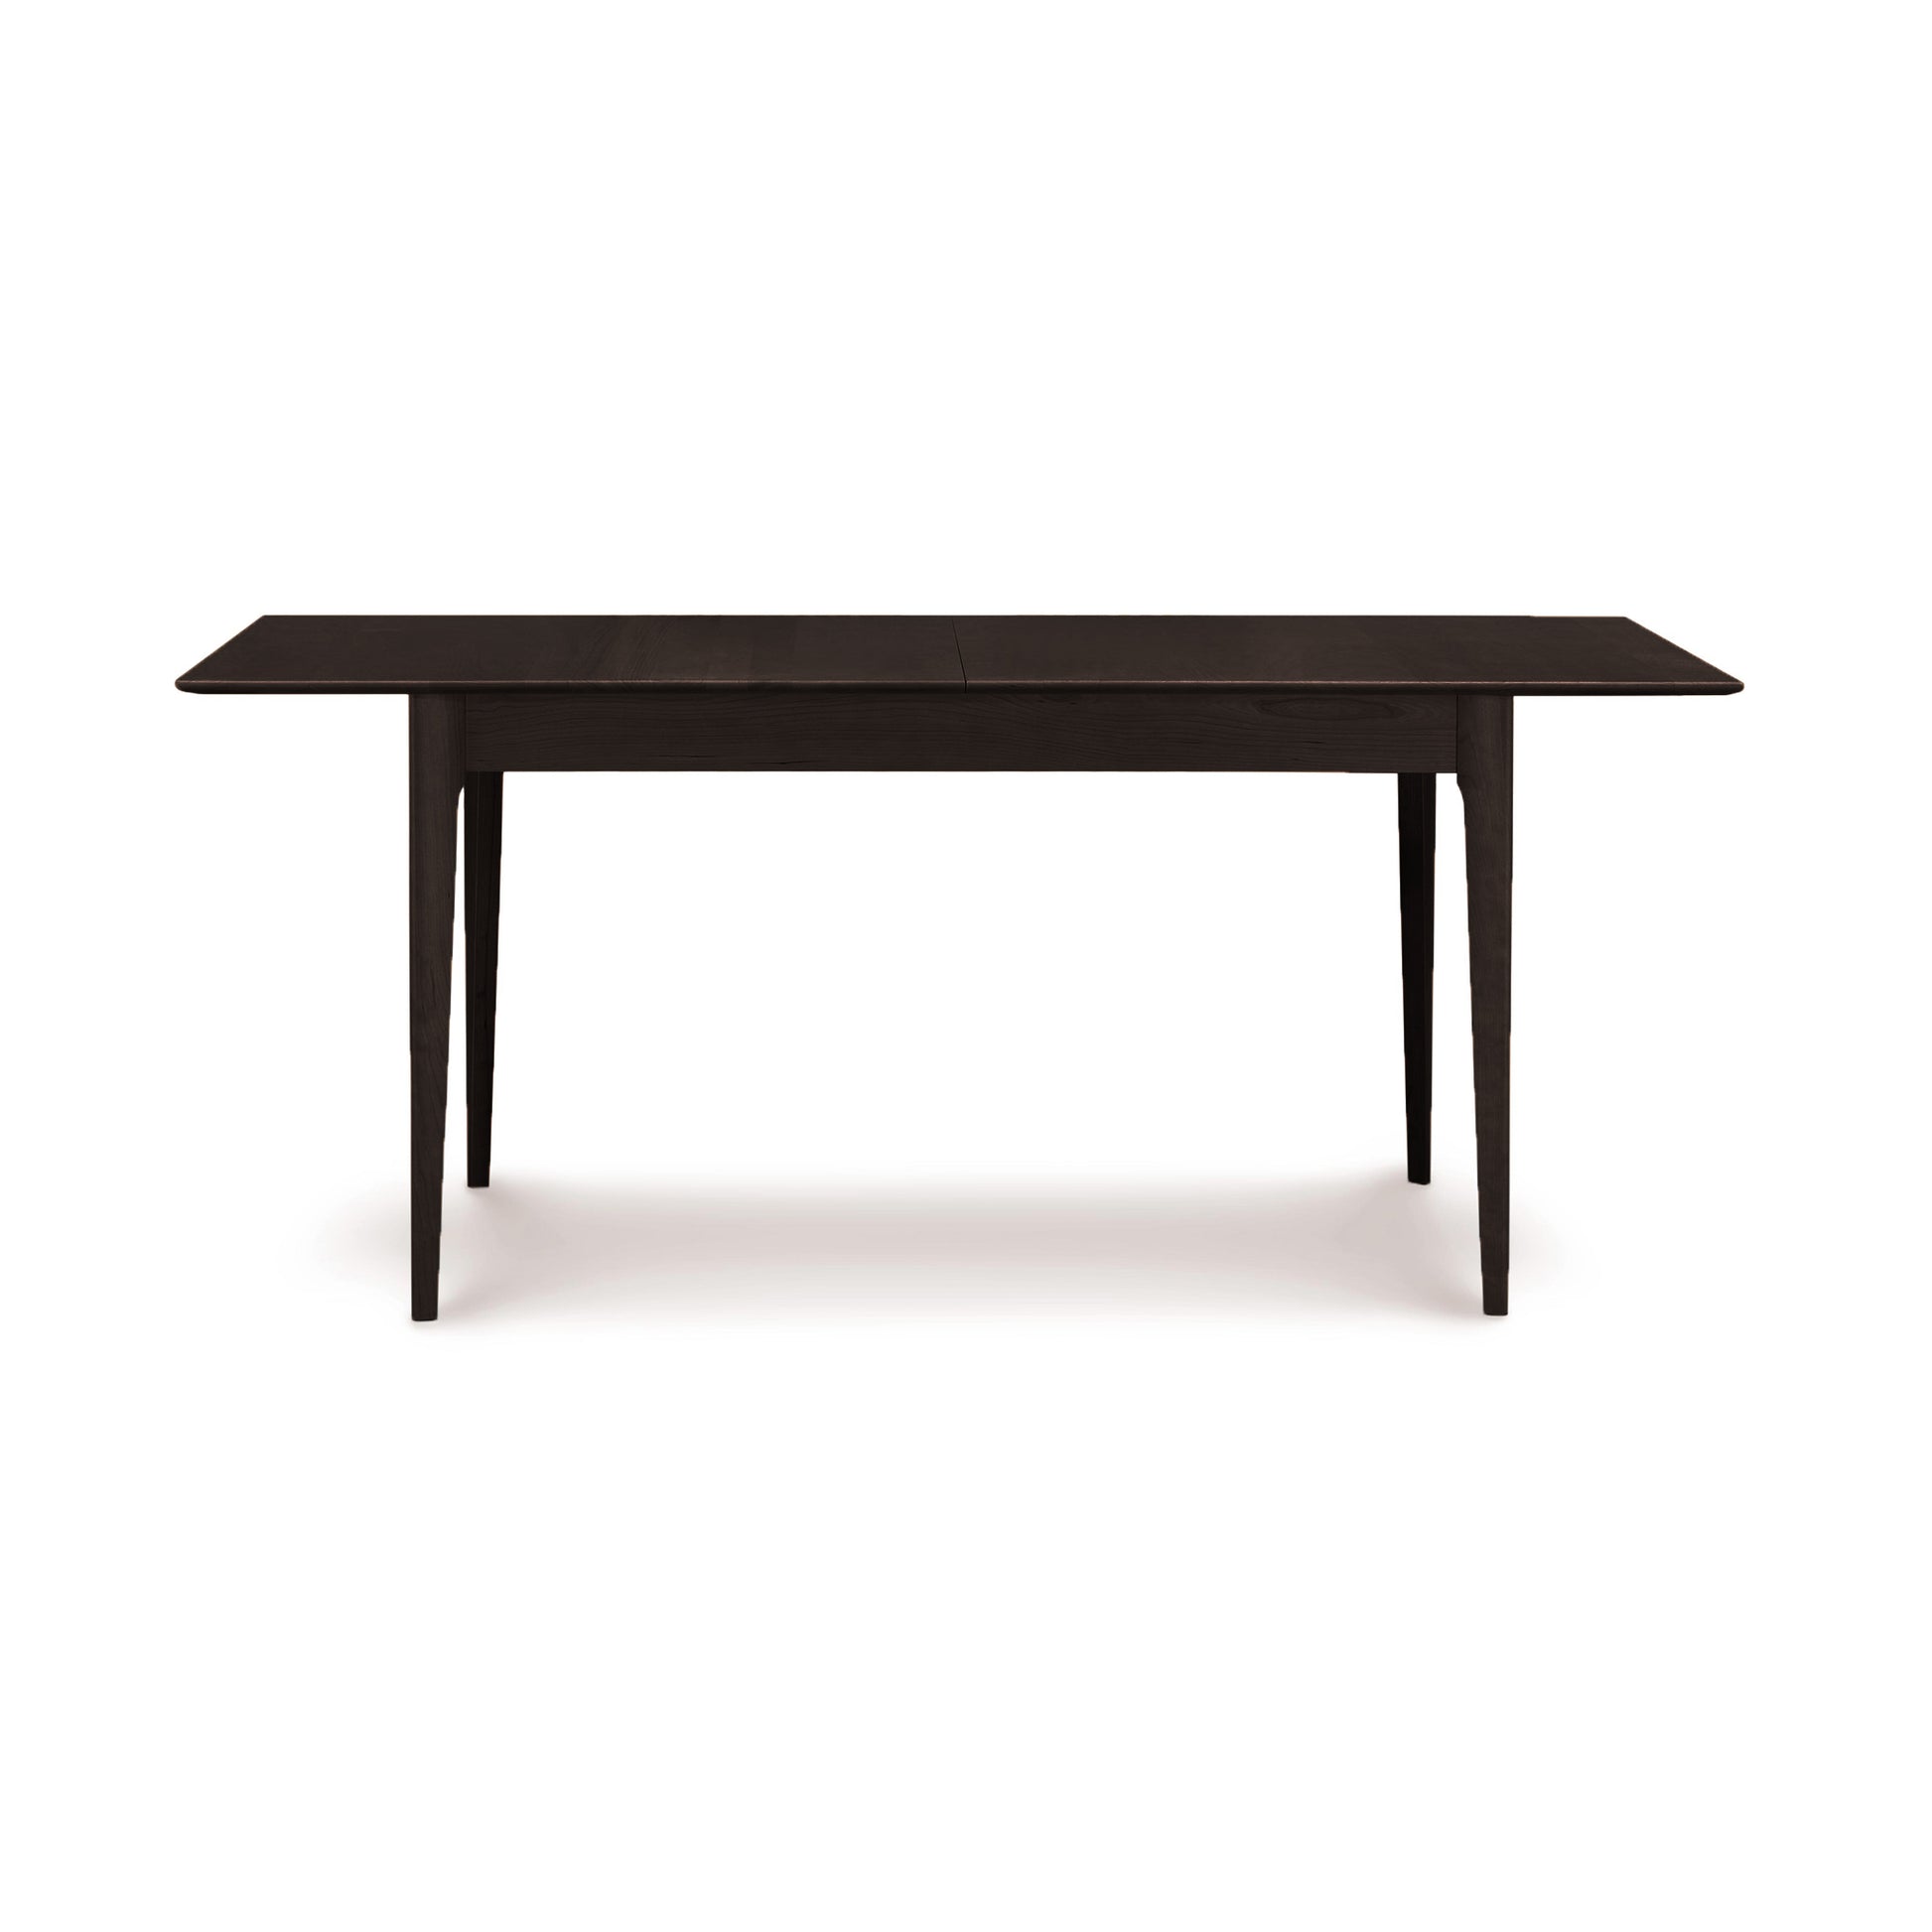 A rectangular dark cherry wooden table with a simplistic design, isolated on a white background from the Copeland Furniture Sarah Shaker Tapered Leg Extension Table.